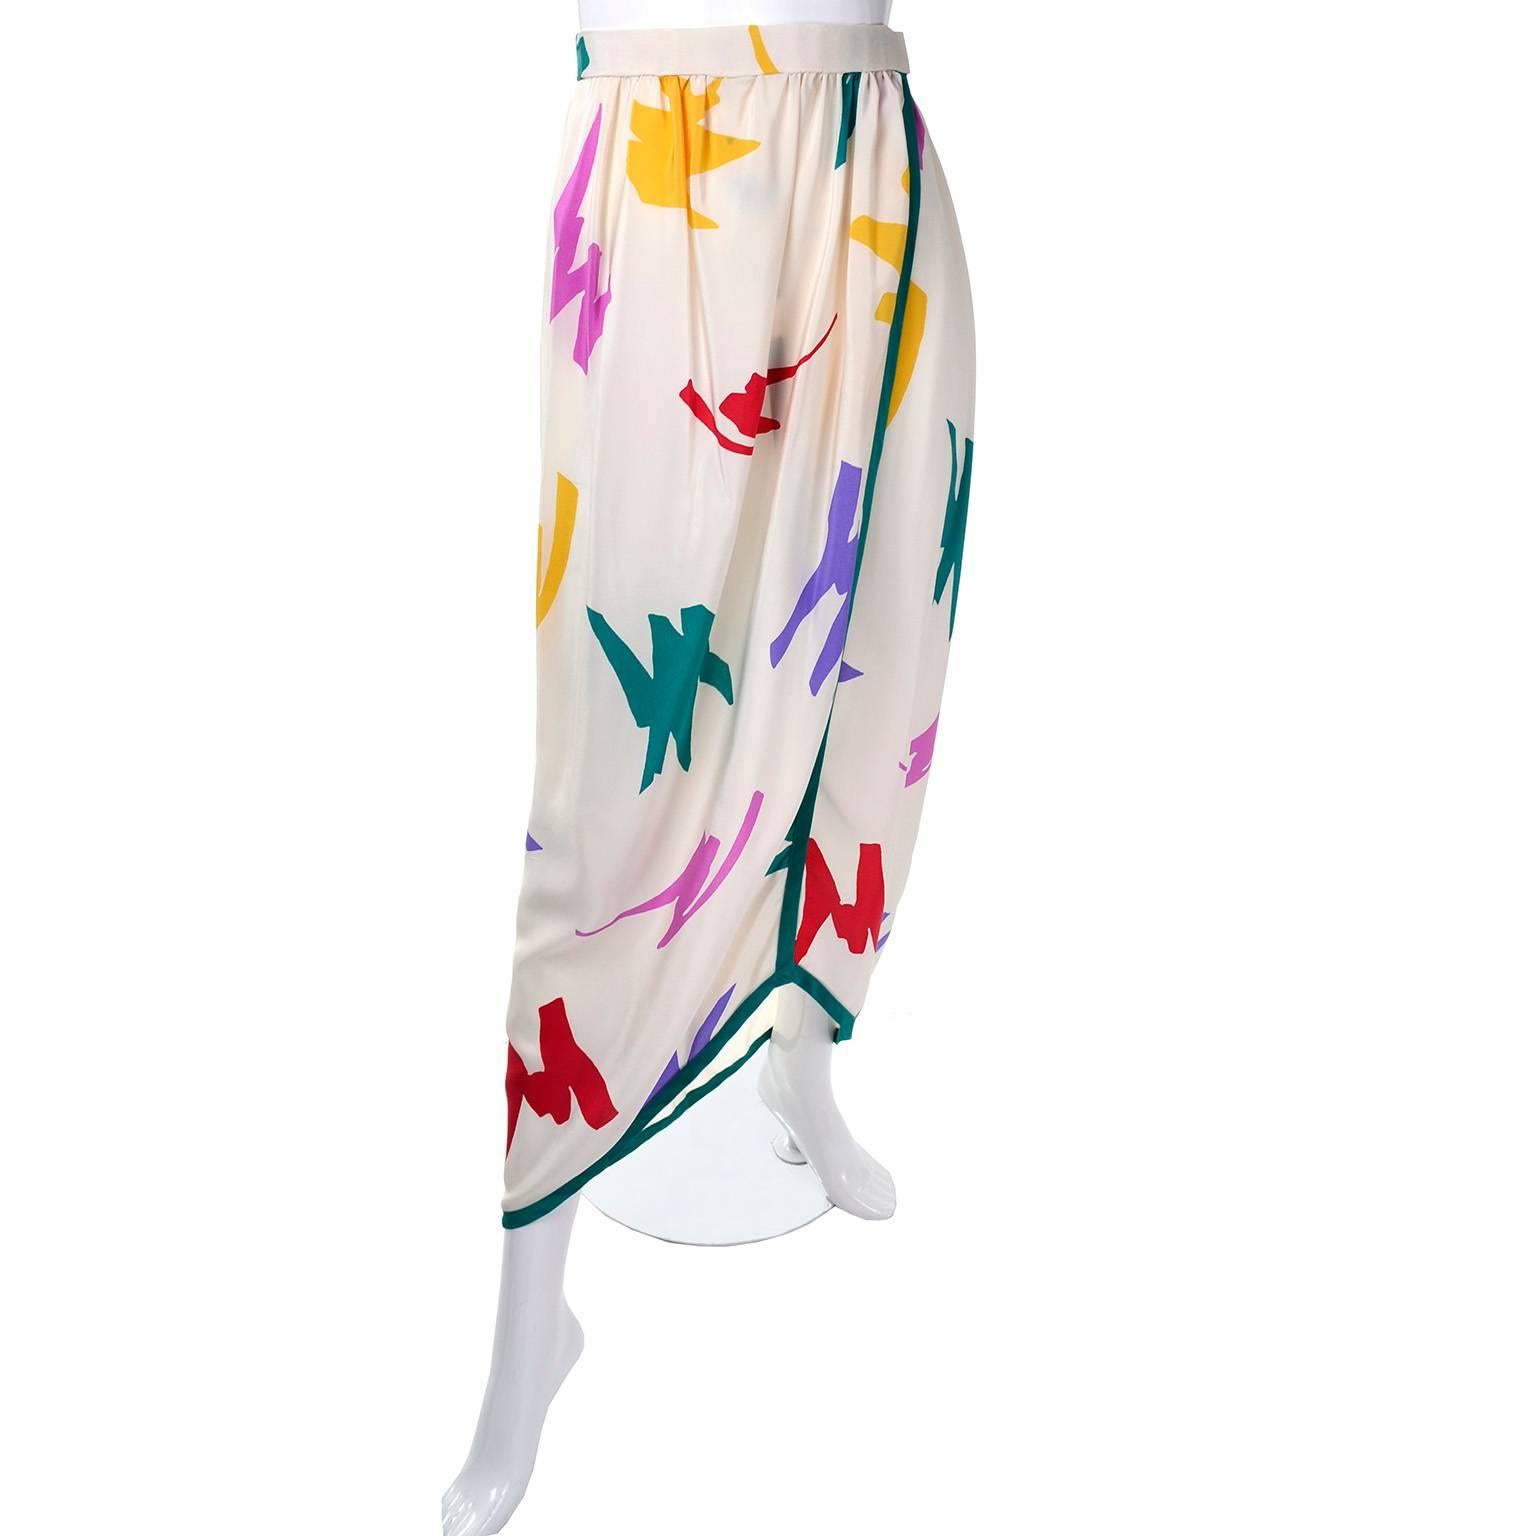 Oscar de la Renta Vintage Skirt in Abstract Jewel Tone Print on Ivory Silk In Excellent Condition In Portland, OR